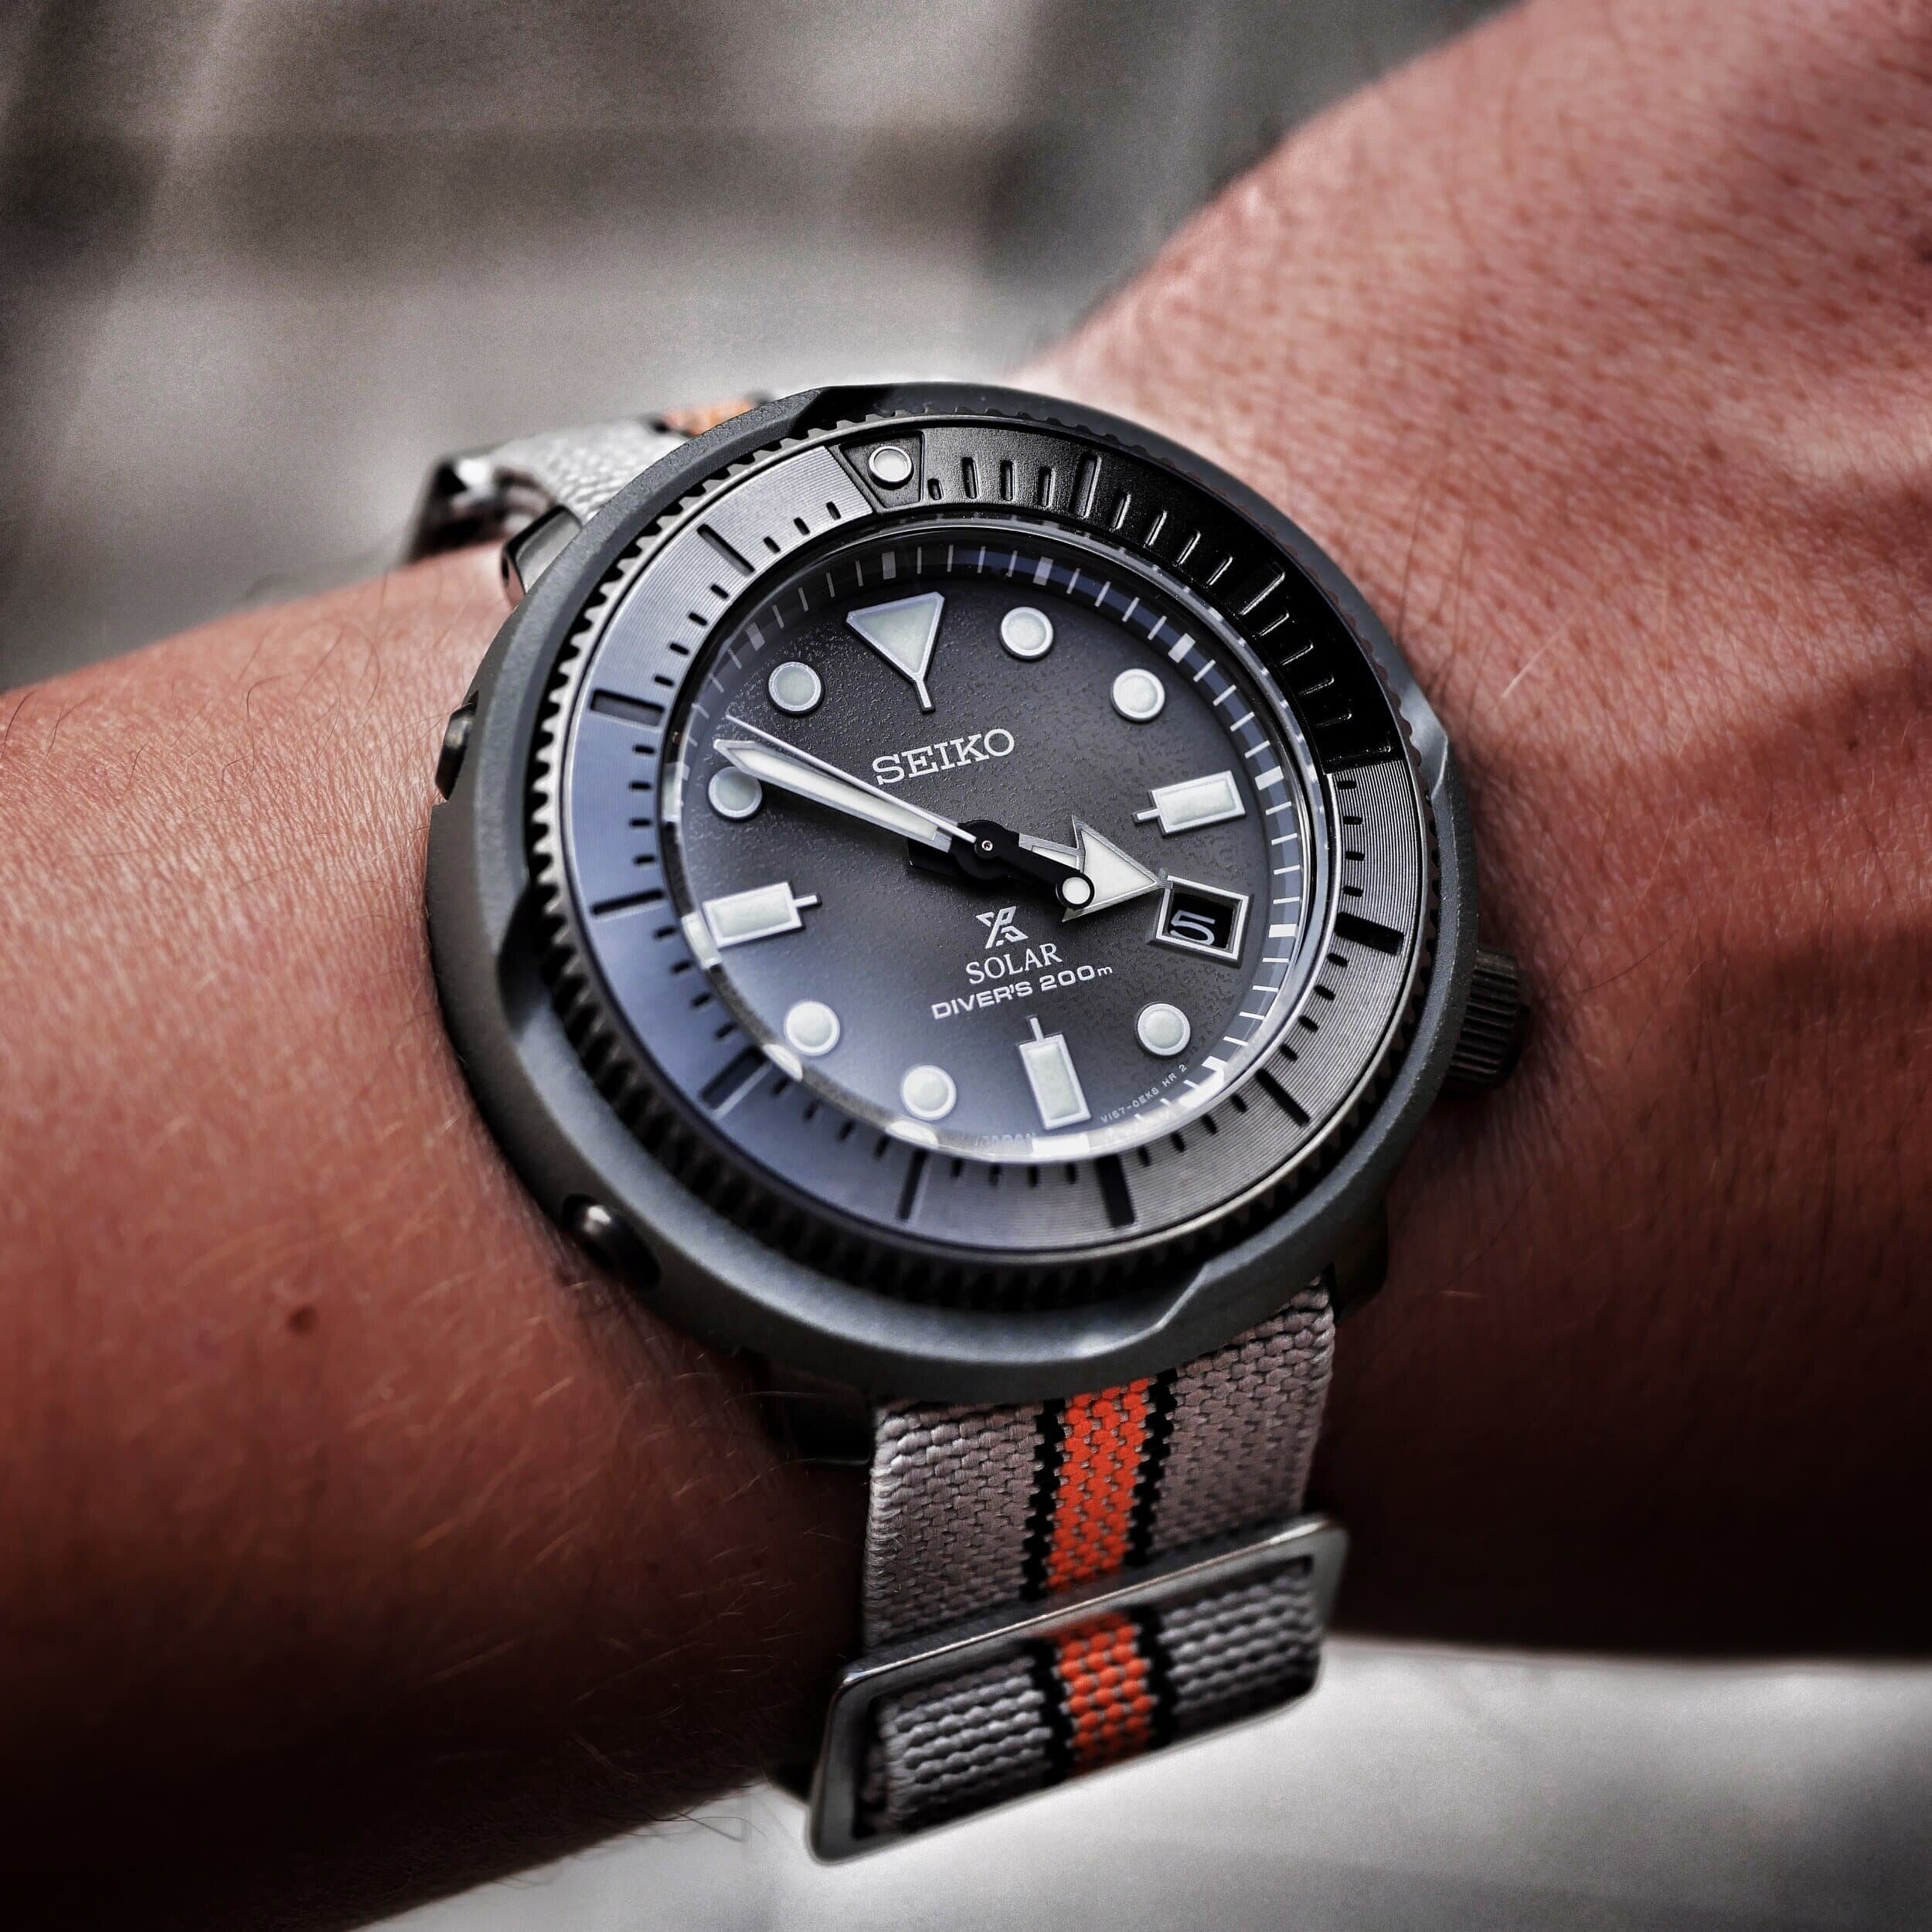 Seiko Tuna Street Series Watch Review: Is It the Best Urban Diver Watch ...